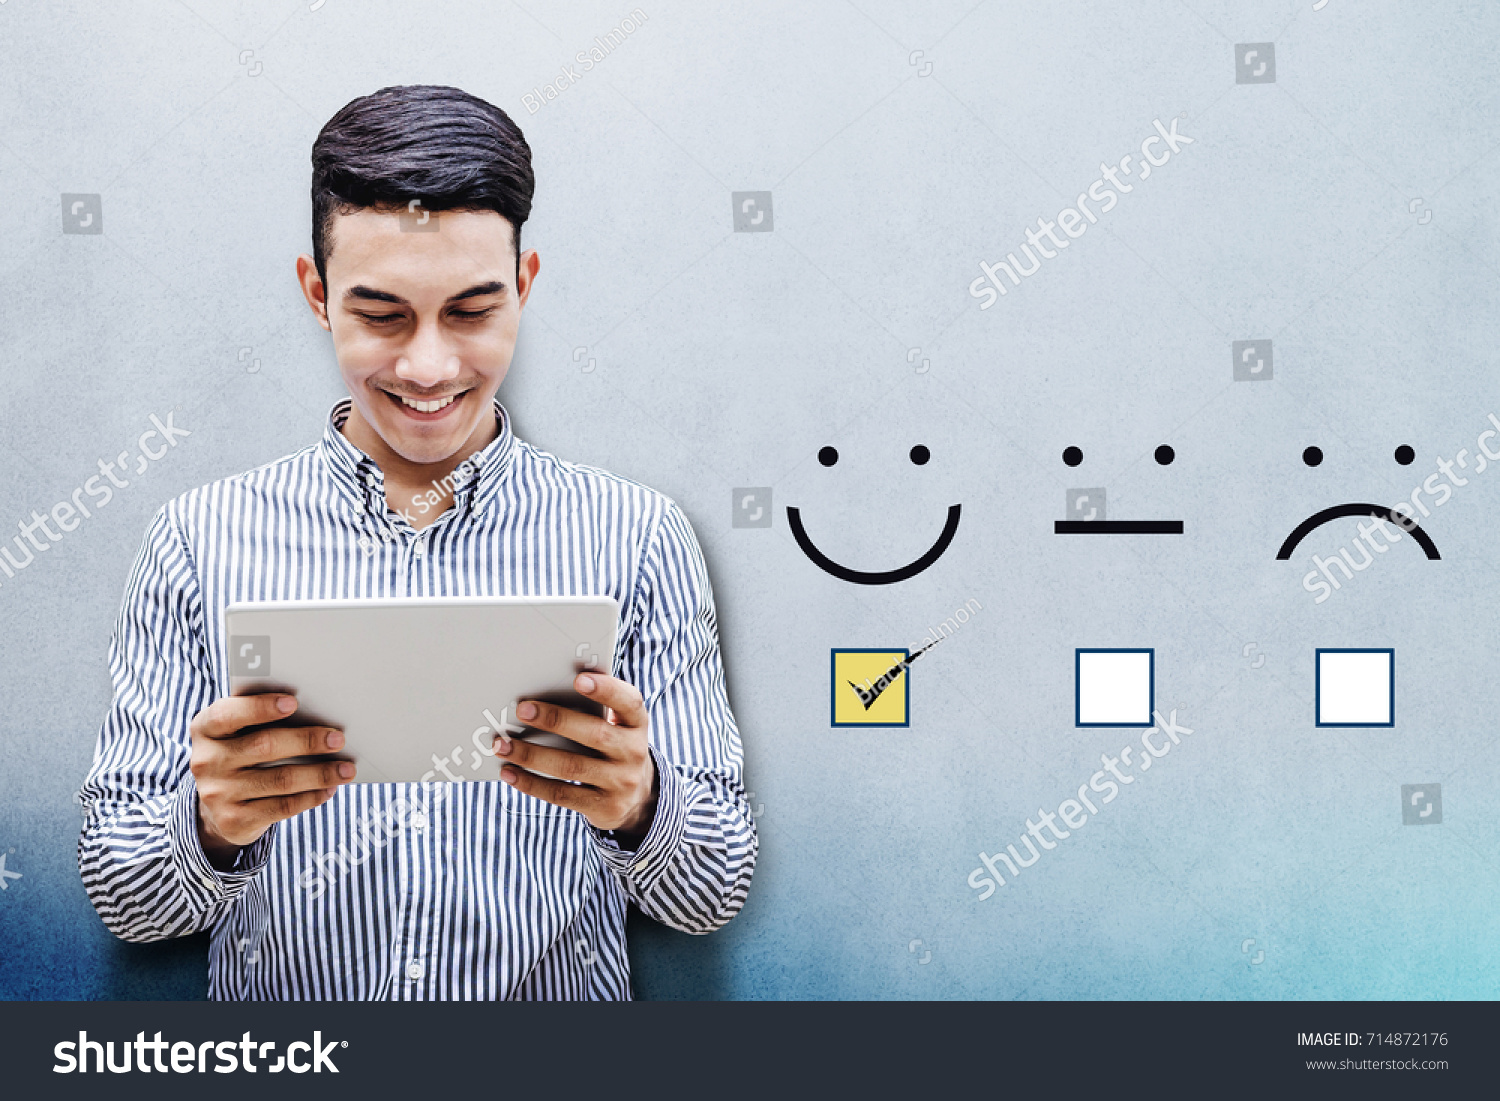 Customer Experience Concept, Happy Businessman holding digital Tablet with a checked box on Excellent Smiley Face Rating for a Satisfaction Survey #714872176